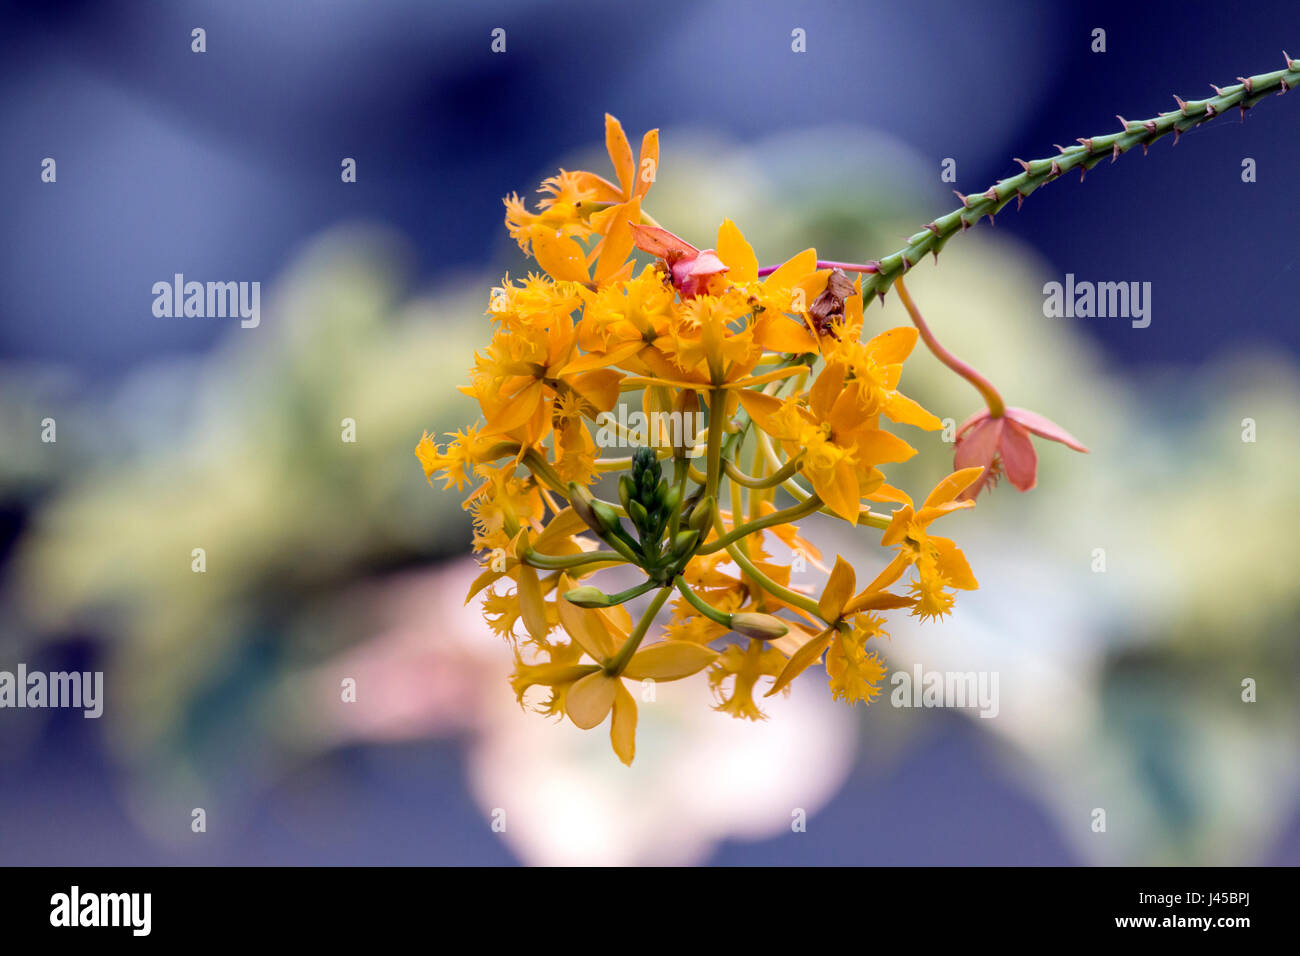 Close up of stem and orange epidendrum orchid flower against blurred bokeh background Stock Photo